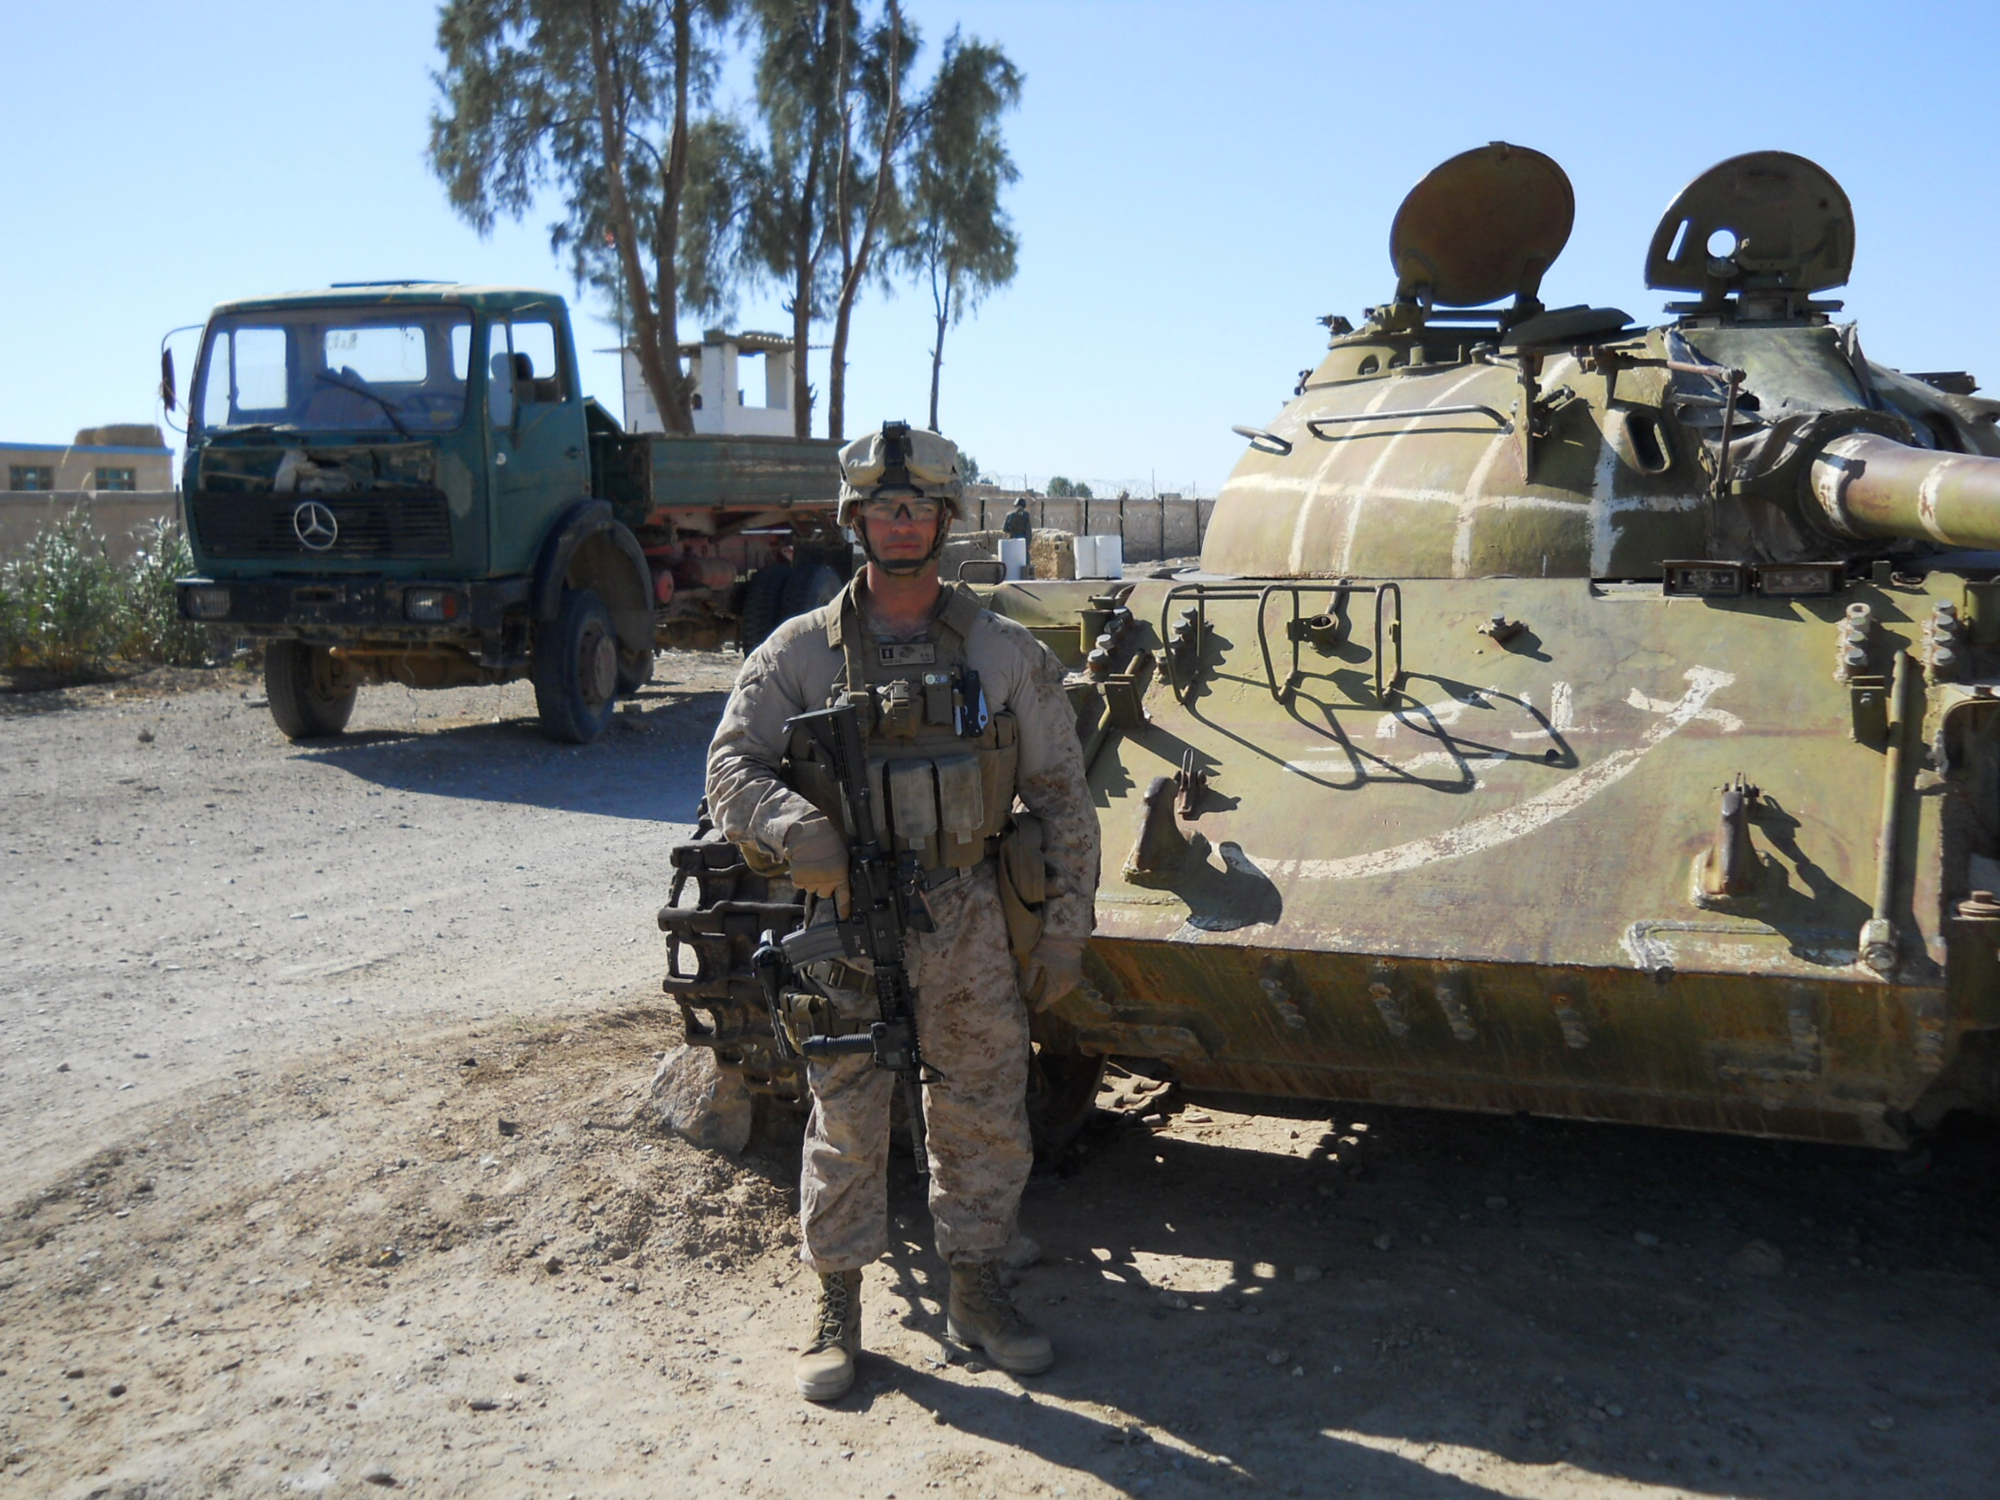 Sean Gobin stands in full combat gear in front of a military tank in the desert of south west Afghanistan.